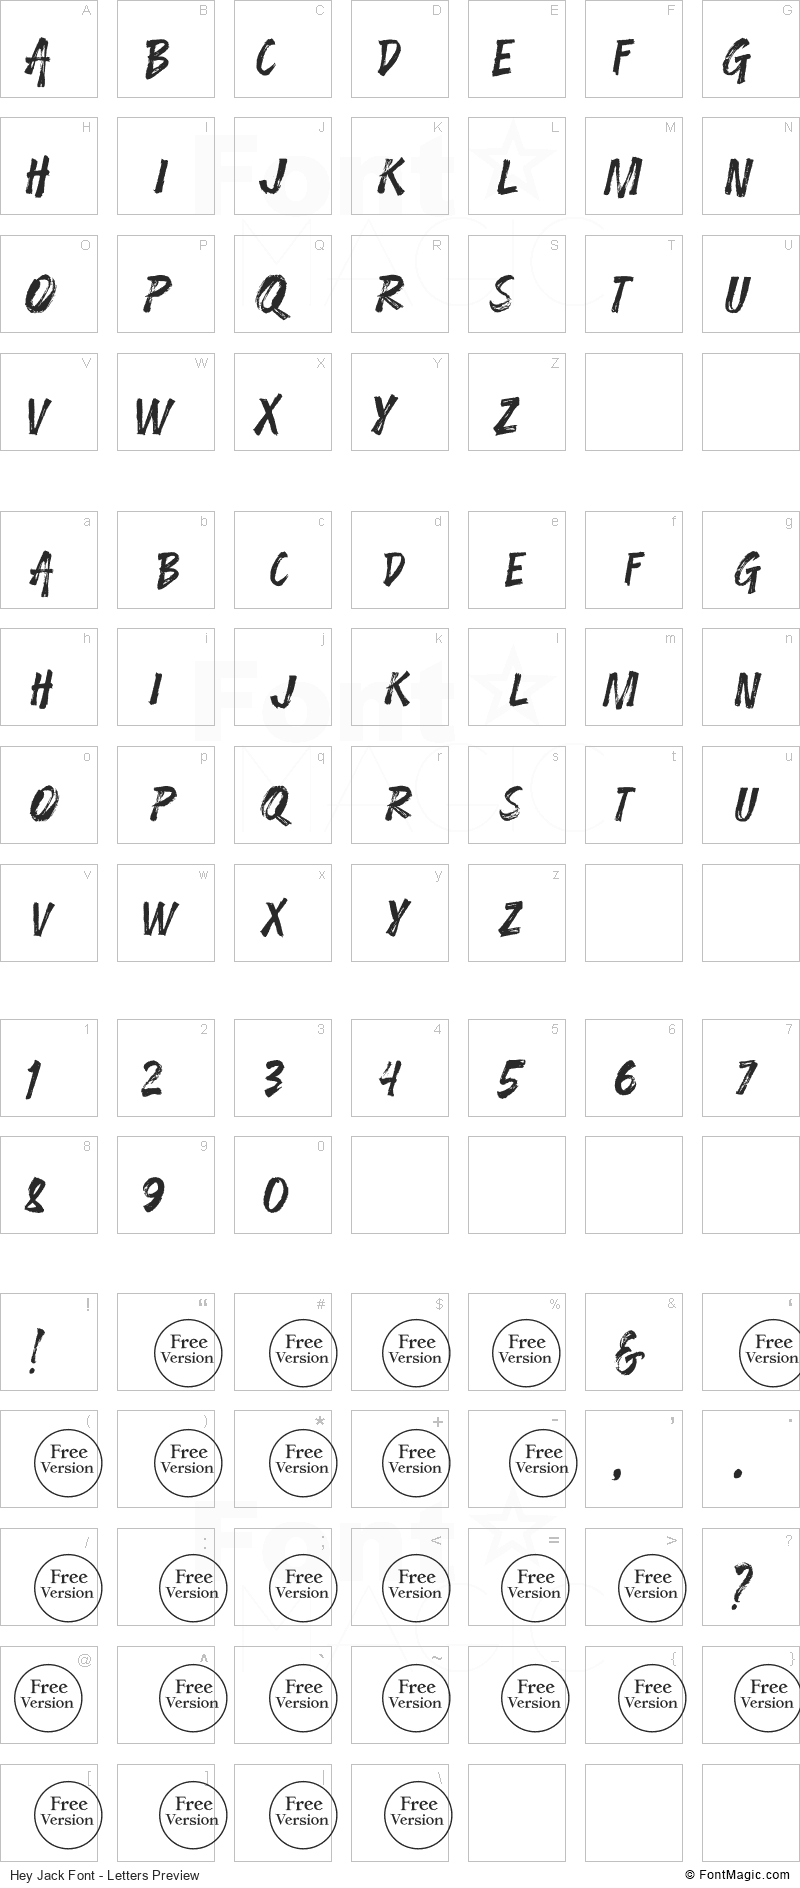 Hey Jack Font - All Latters Preview Chart